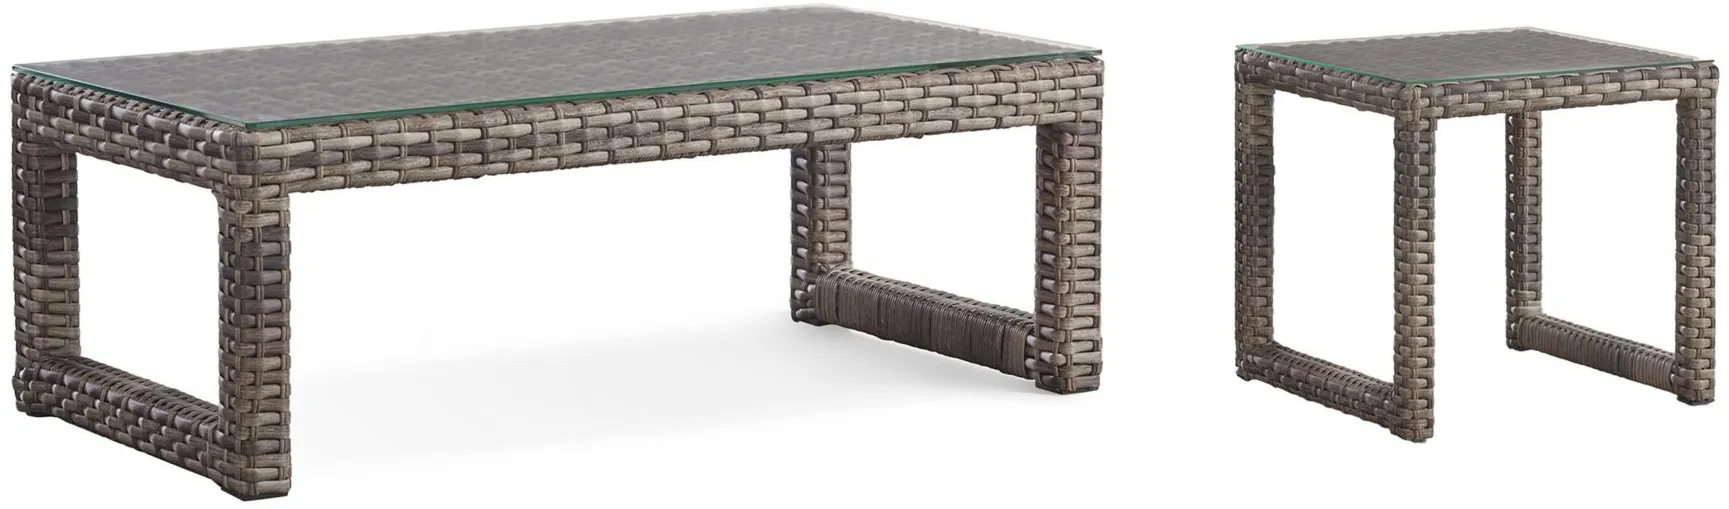 New Java 2-pc. Outdoor Table Set in Sandstone by South Sea Outdoor Living